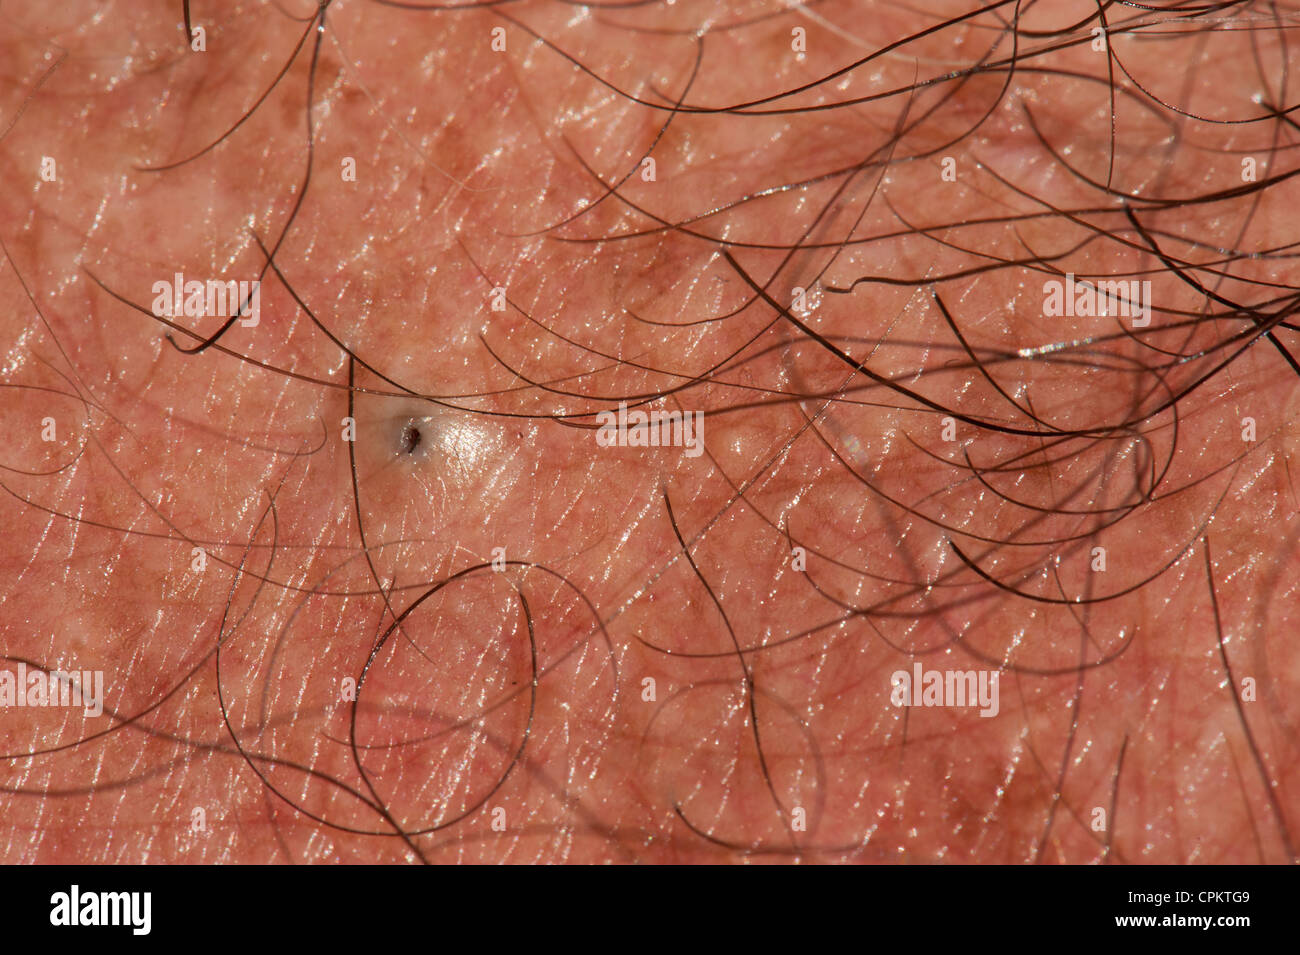 A forming blackhead on chest Stock Photo